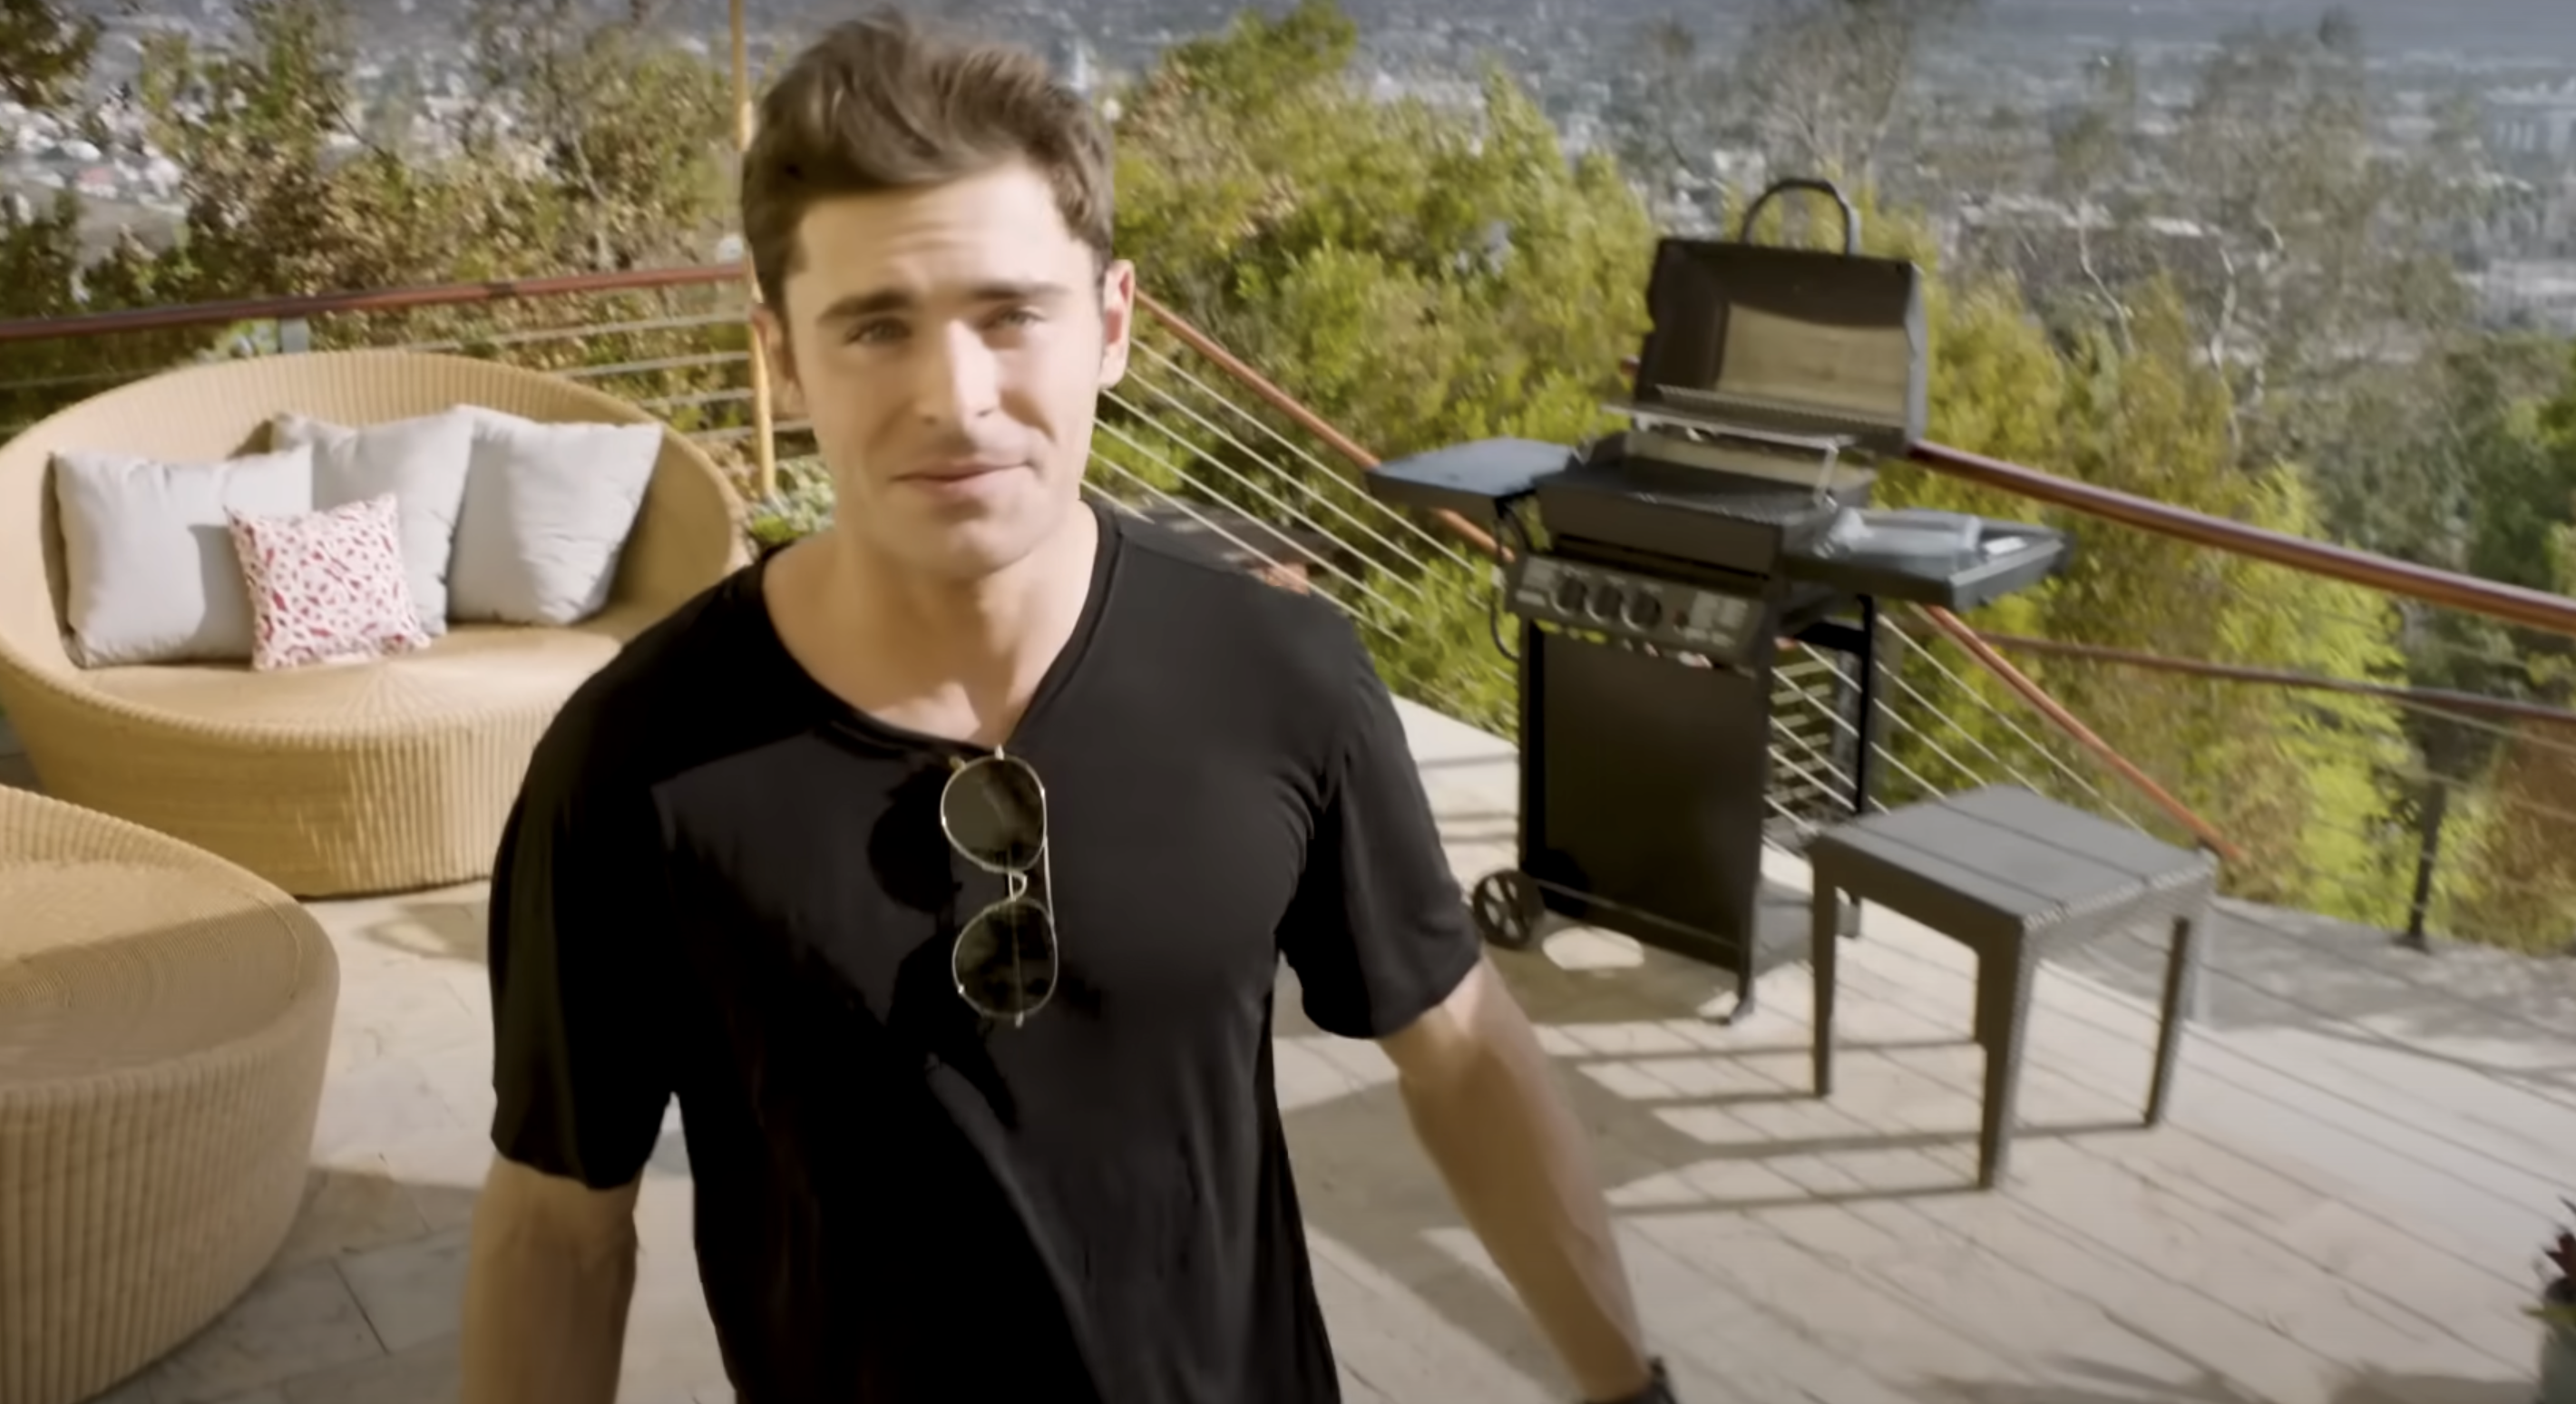 Zac Efron in his LA residence, as seen in a video dated September 27, 2017 | Source: youtube.com/Vogue